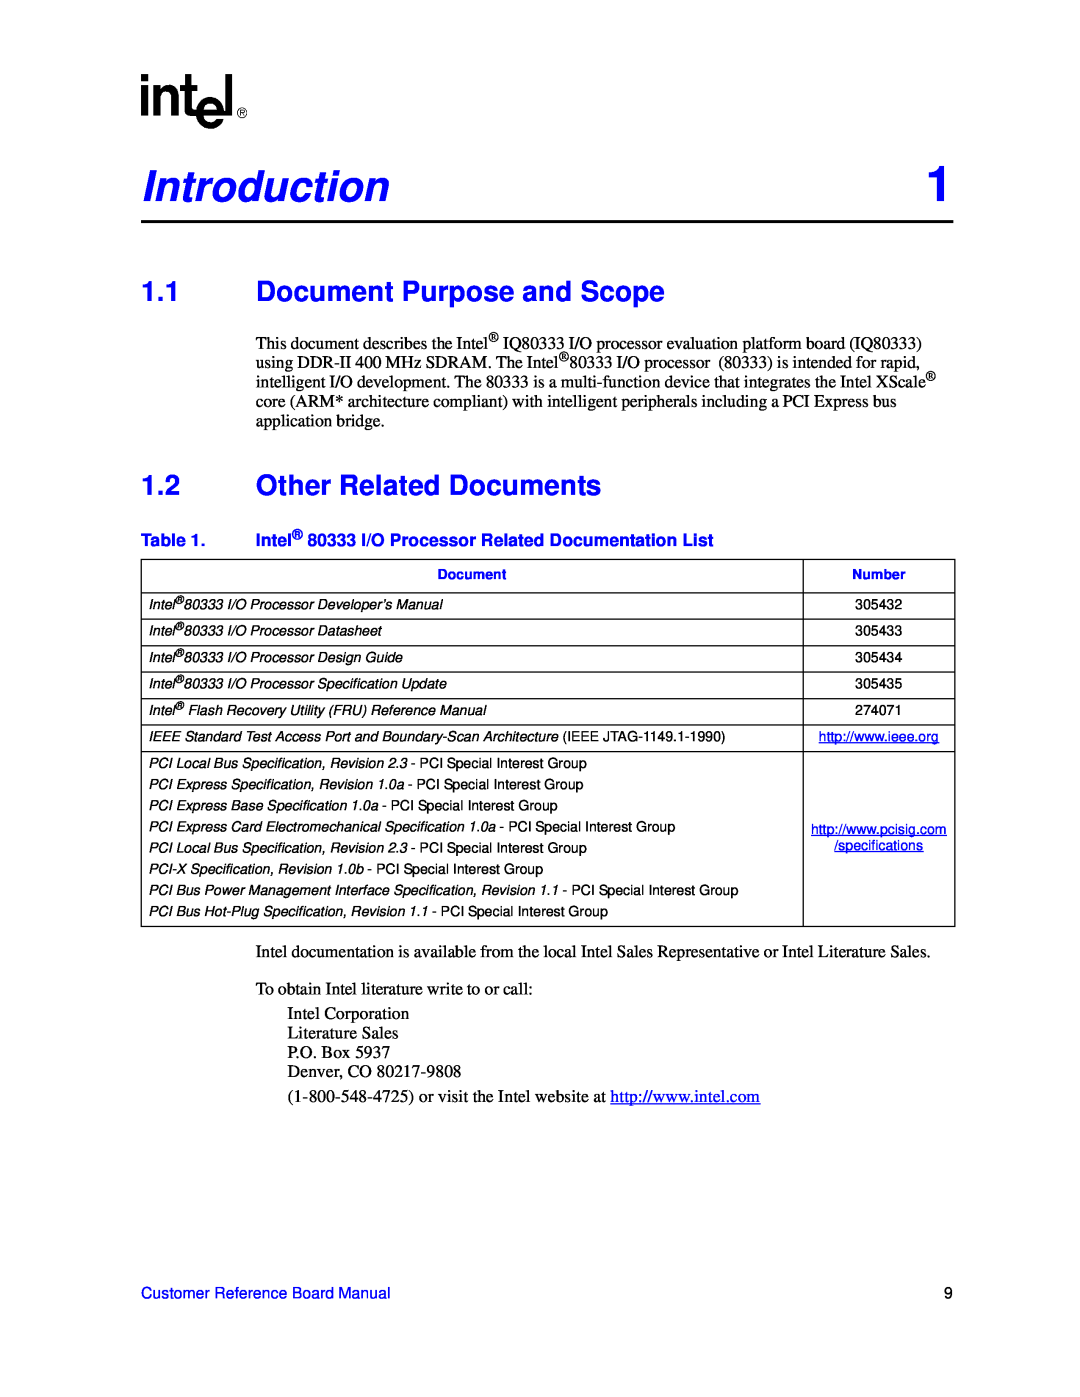 Intel IQ80333 manual Introduction, 1.1Document Purpose and Scope, 1.2Other Related Documents 